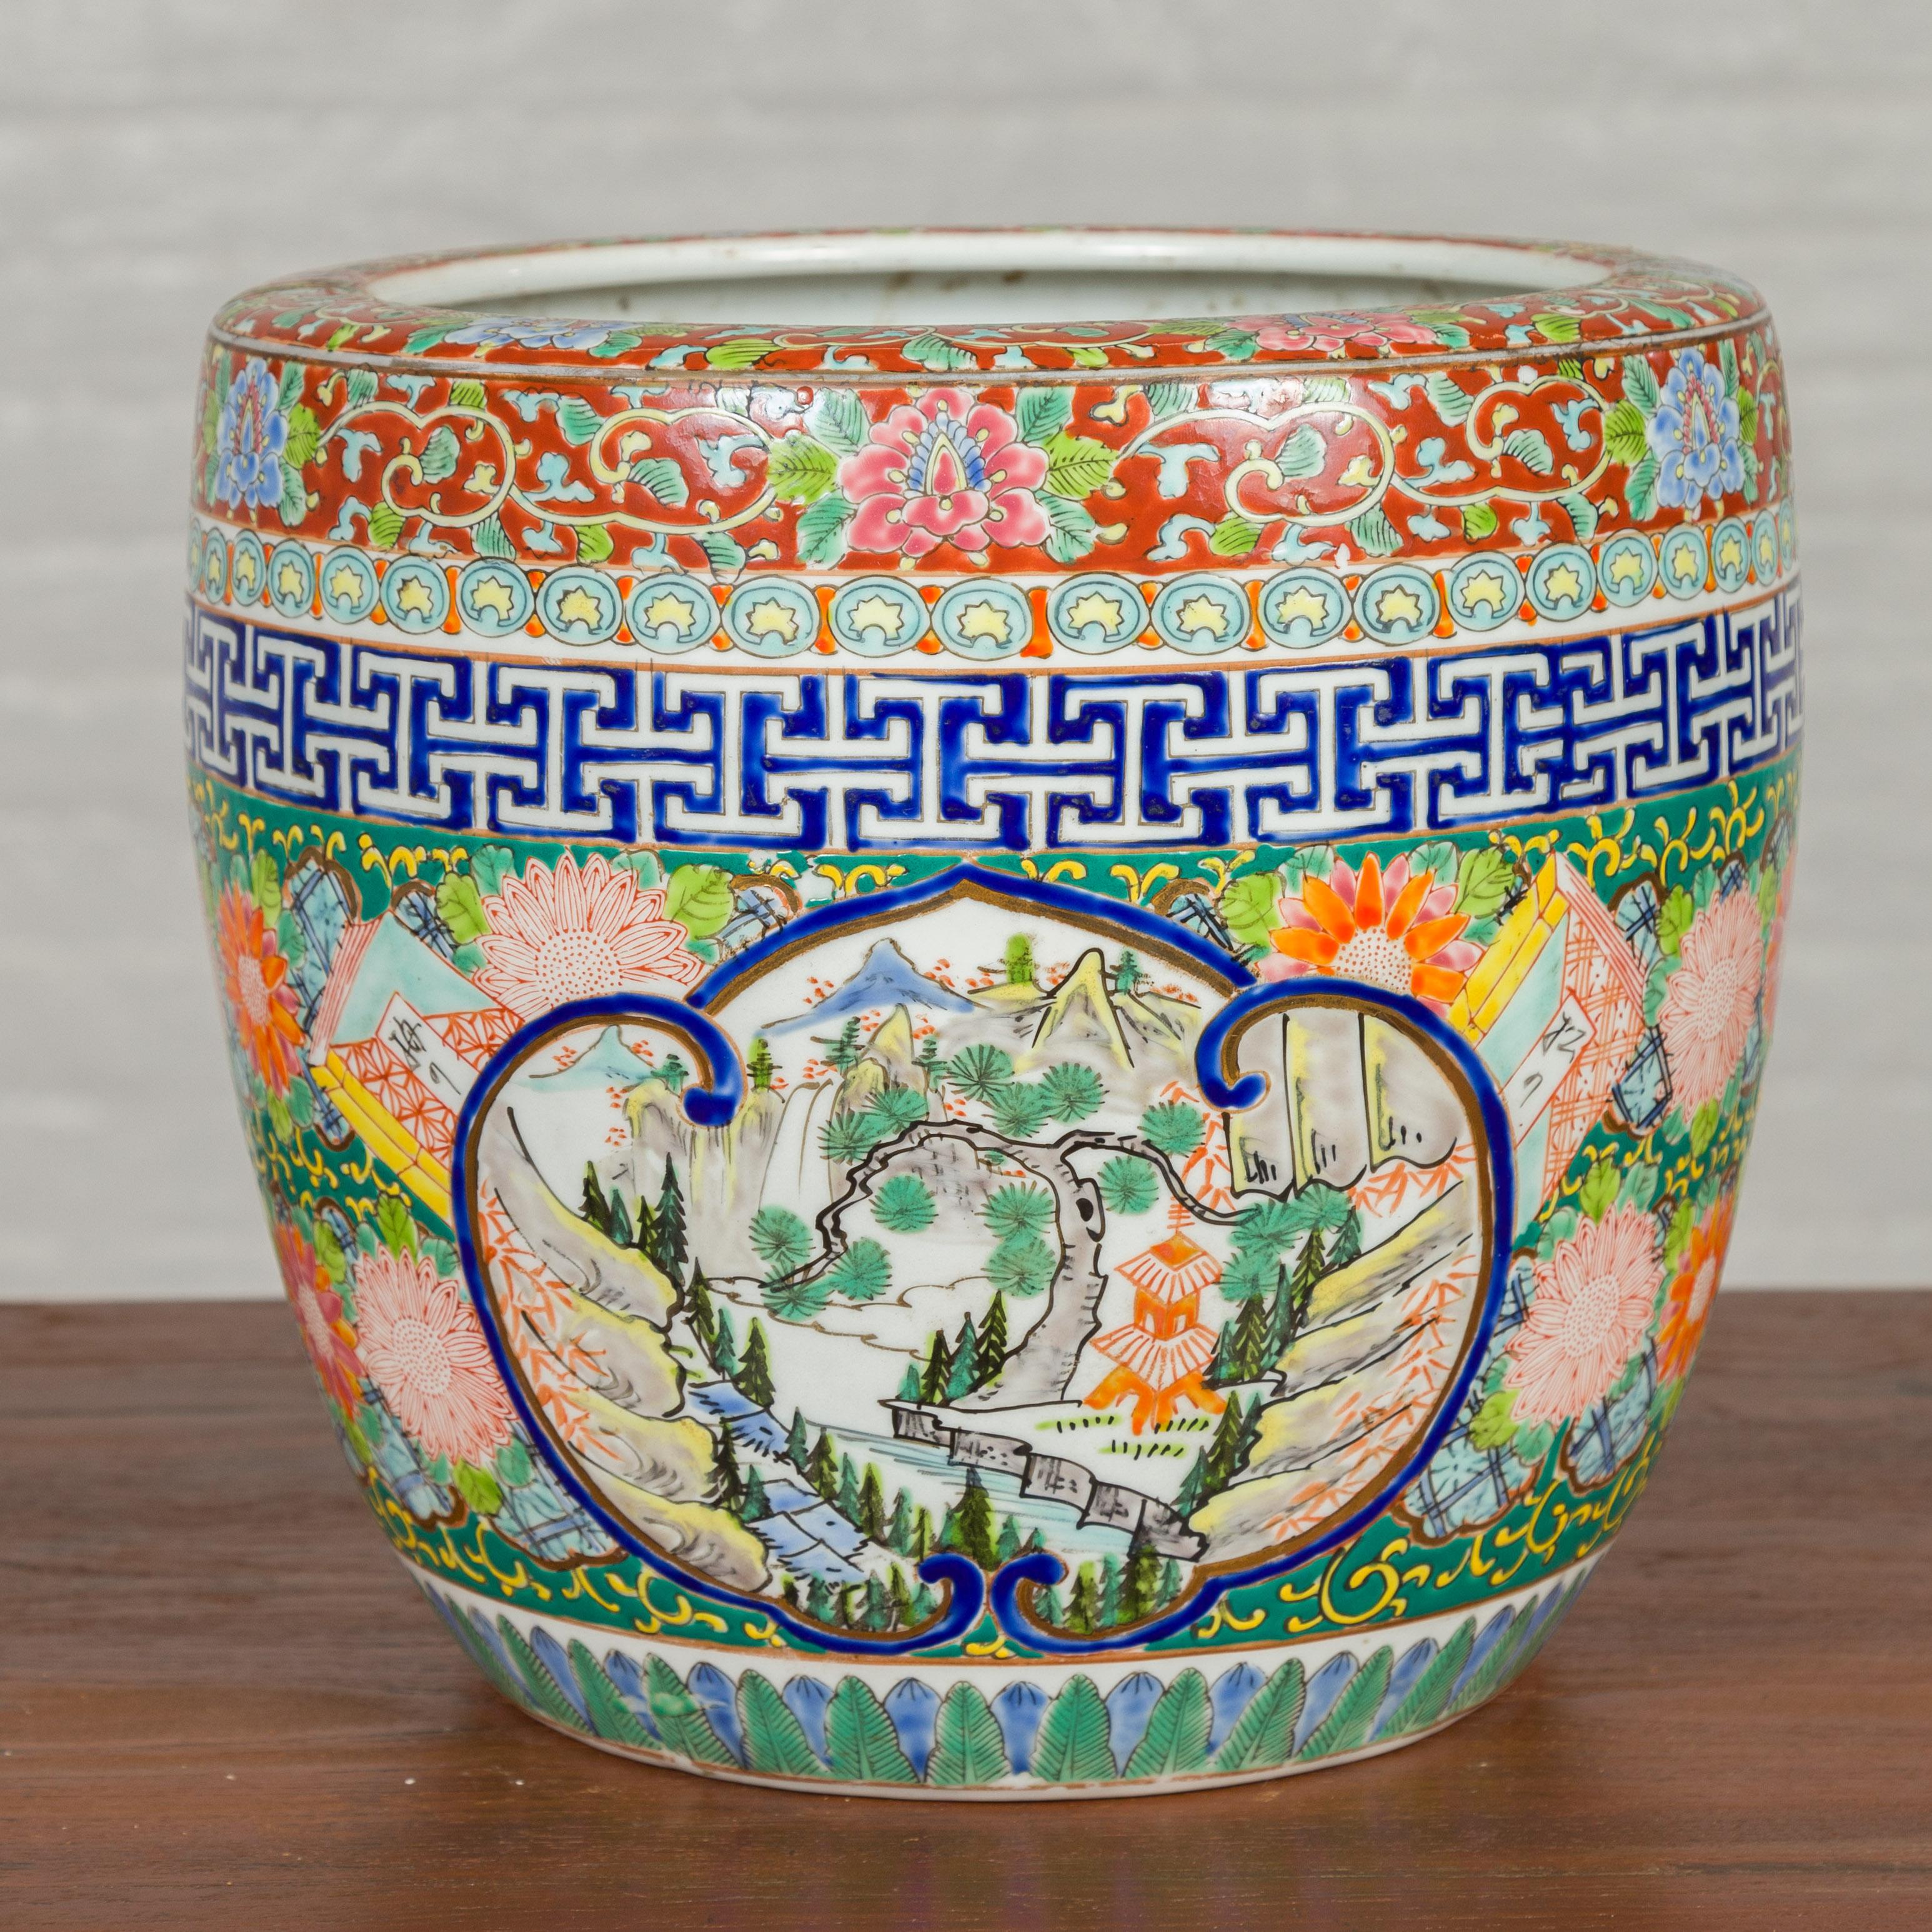 A Japanese Meiji period multi-color planter from the late 19th century, with landscape scenes and floral motifs. Crafted in Japan during the Meiji period, this multi-color planter features a scrolling cartouche on two sides, surrounding a